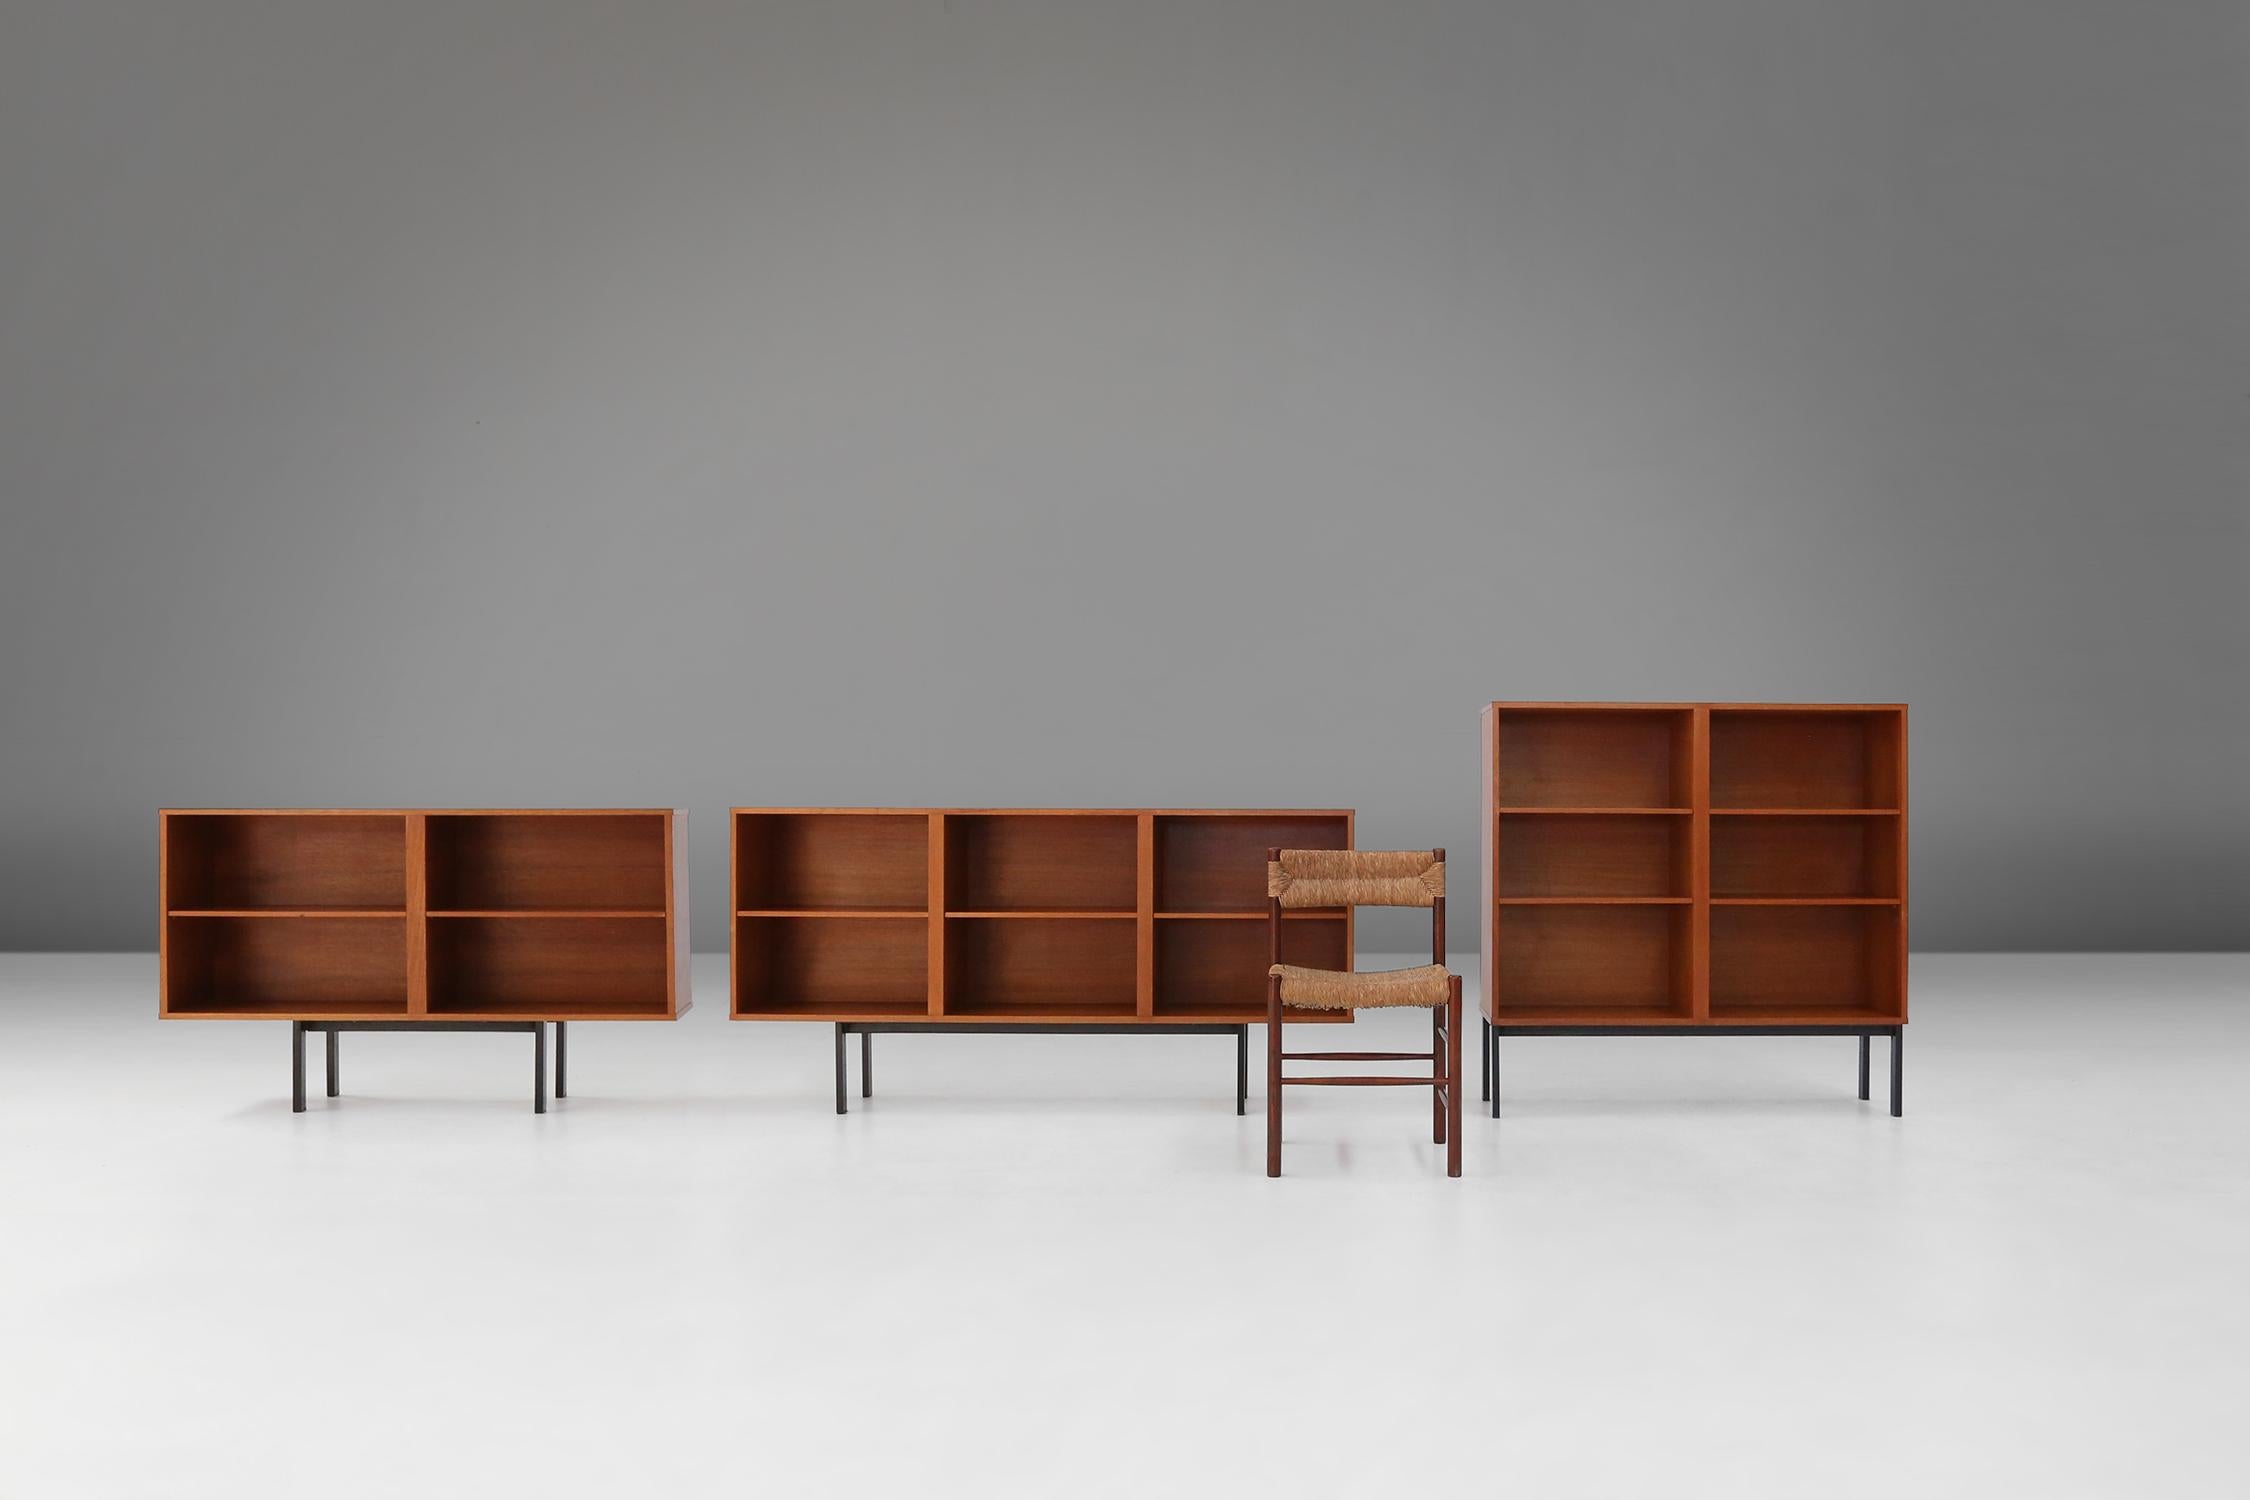 Made in Belgium in the 1960s, these mid-century cabinets combine clean lines, organic shapes and functional beauty. The teak wood is a durable and natural material, which has a warm and elegant look. The metal base gives a nice contrast to the